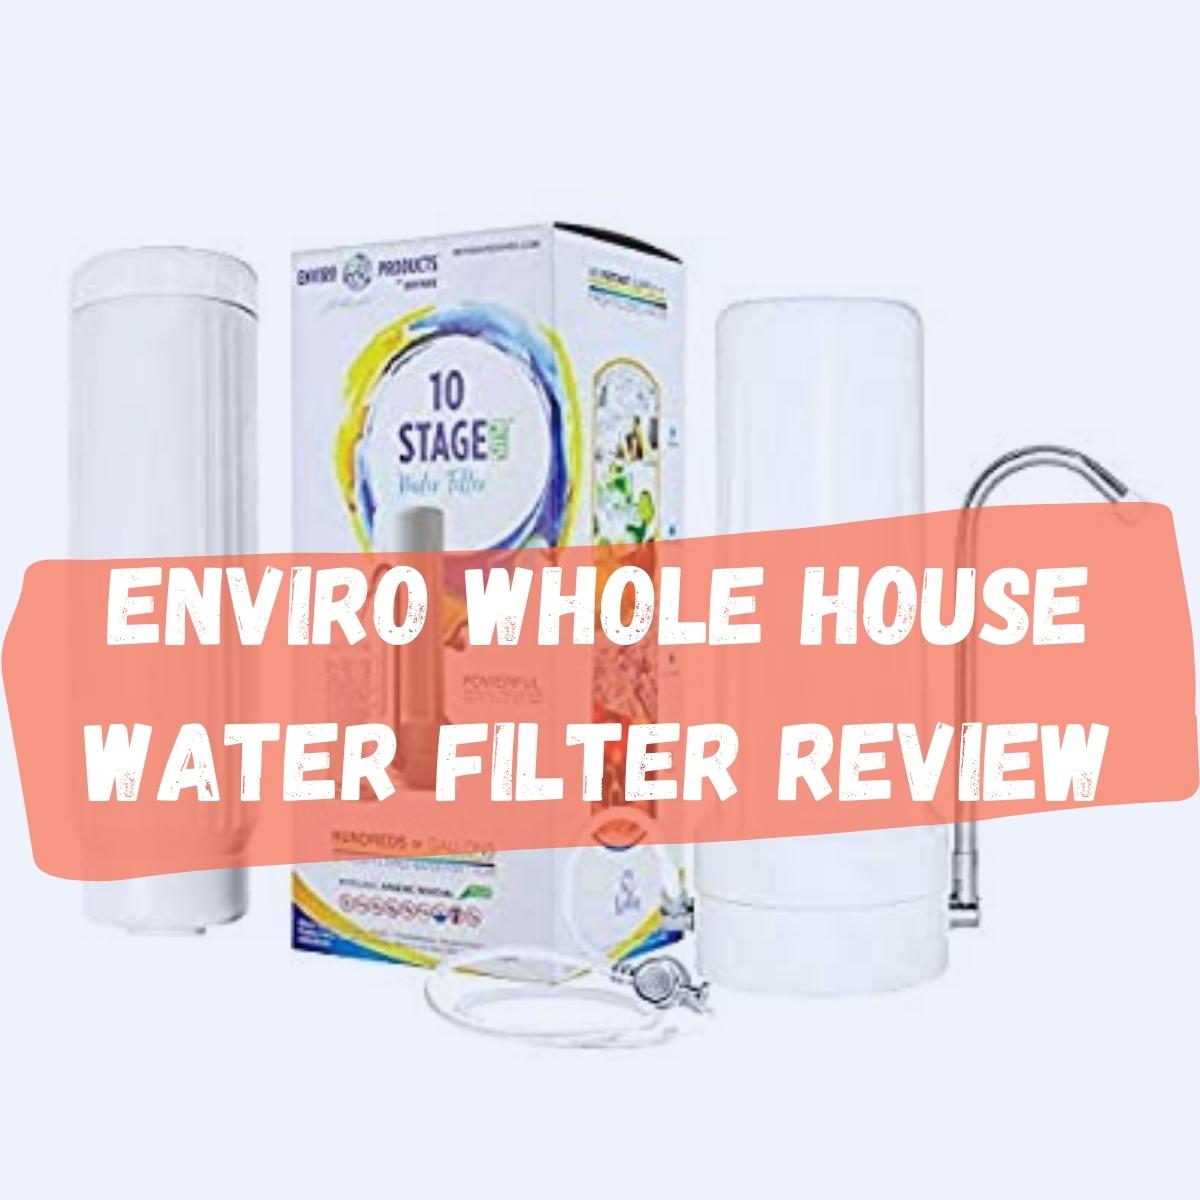 Enviro Whole House Water Filter Review